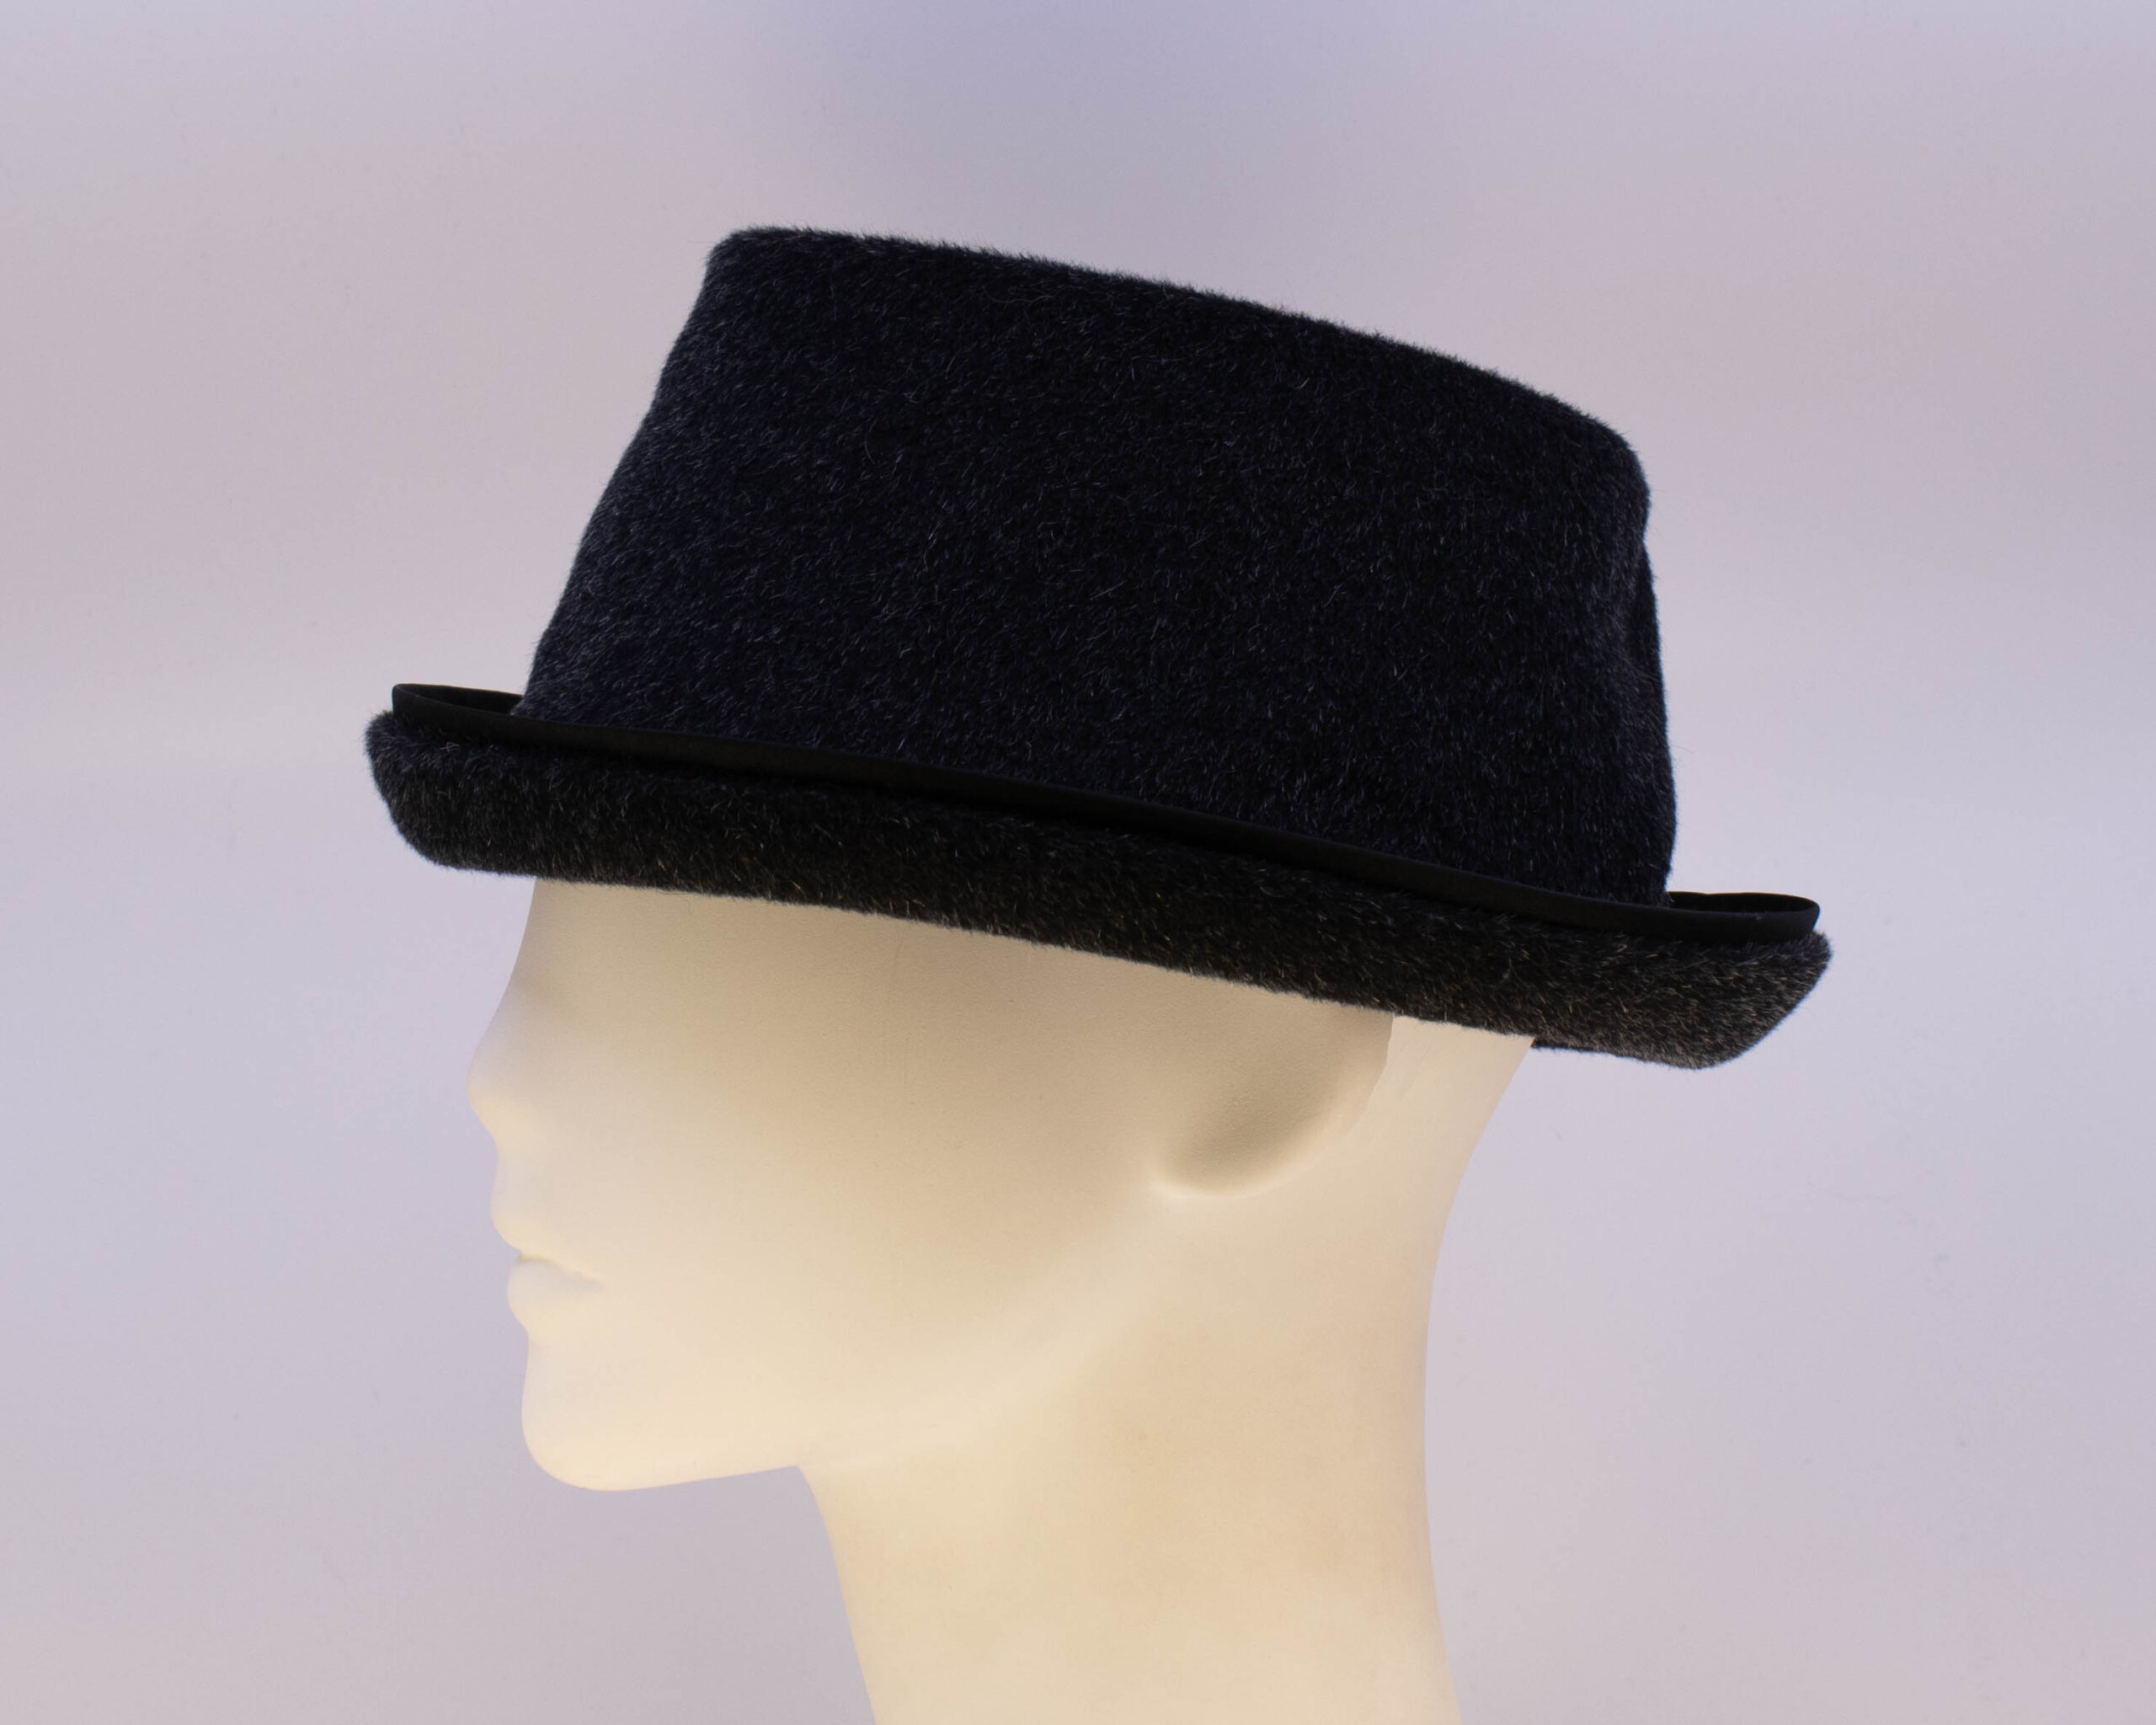 Mohair: Rudy (Mens) - Charcoal (Side View)